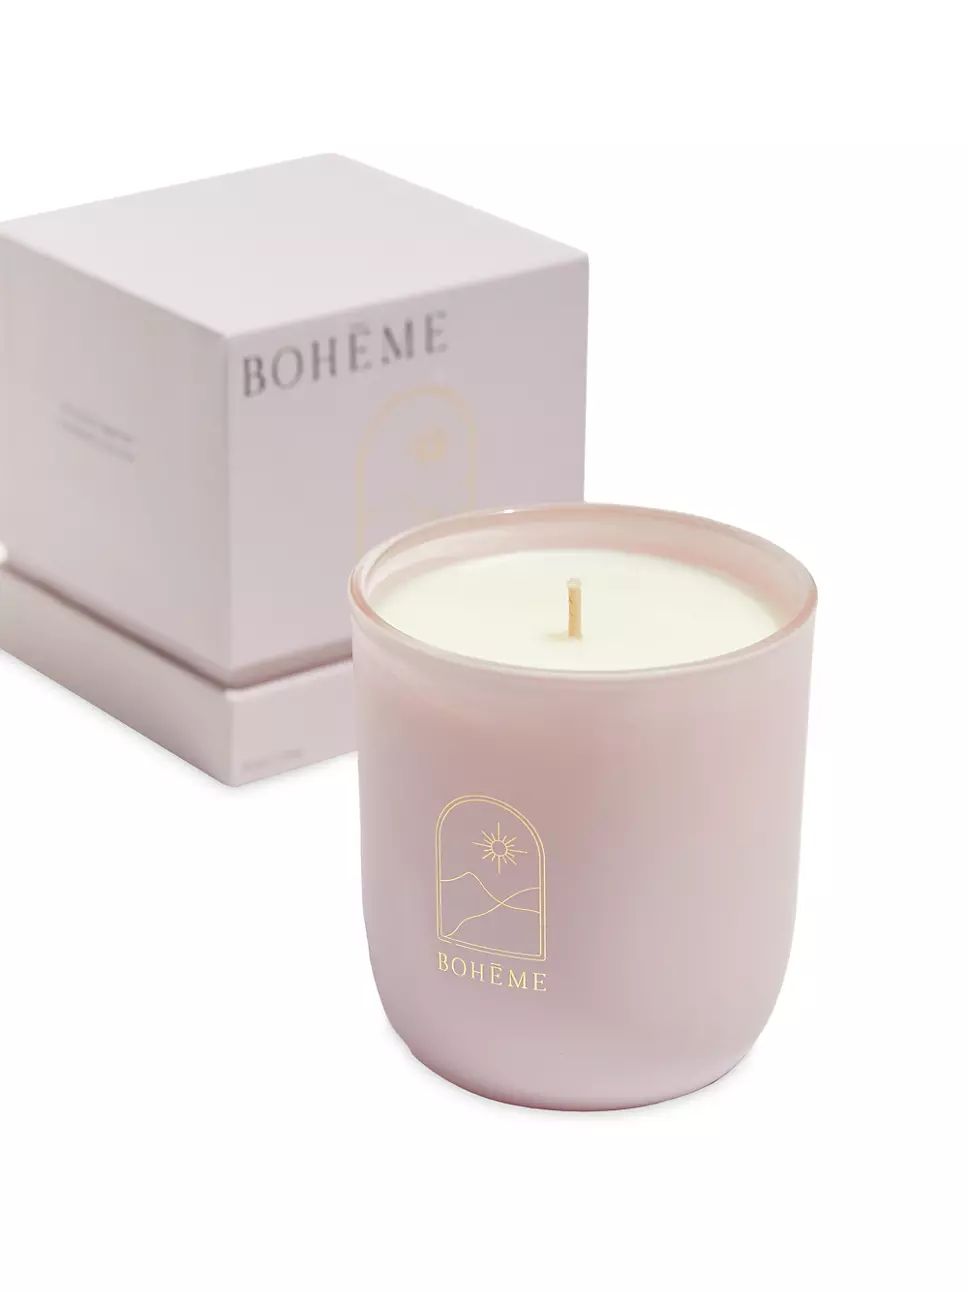 Notting Hill Candle | Saks Fifth Avenue